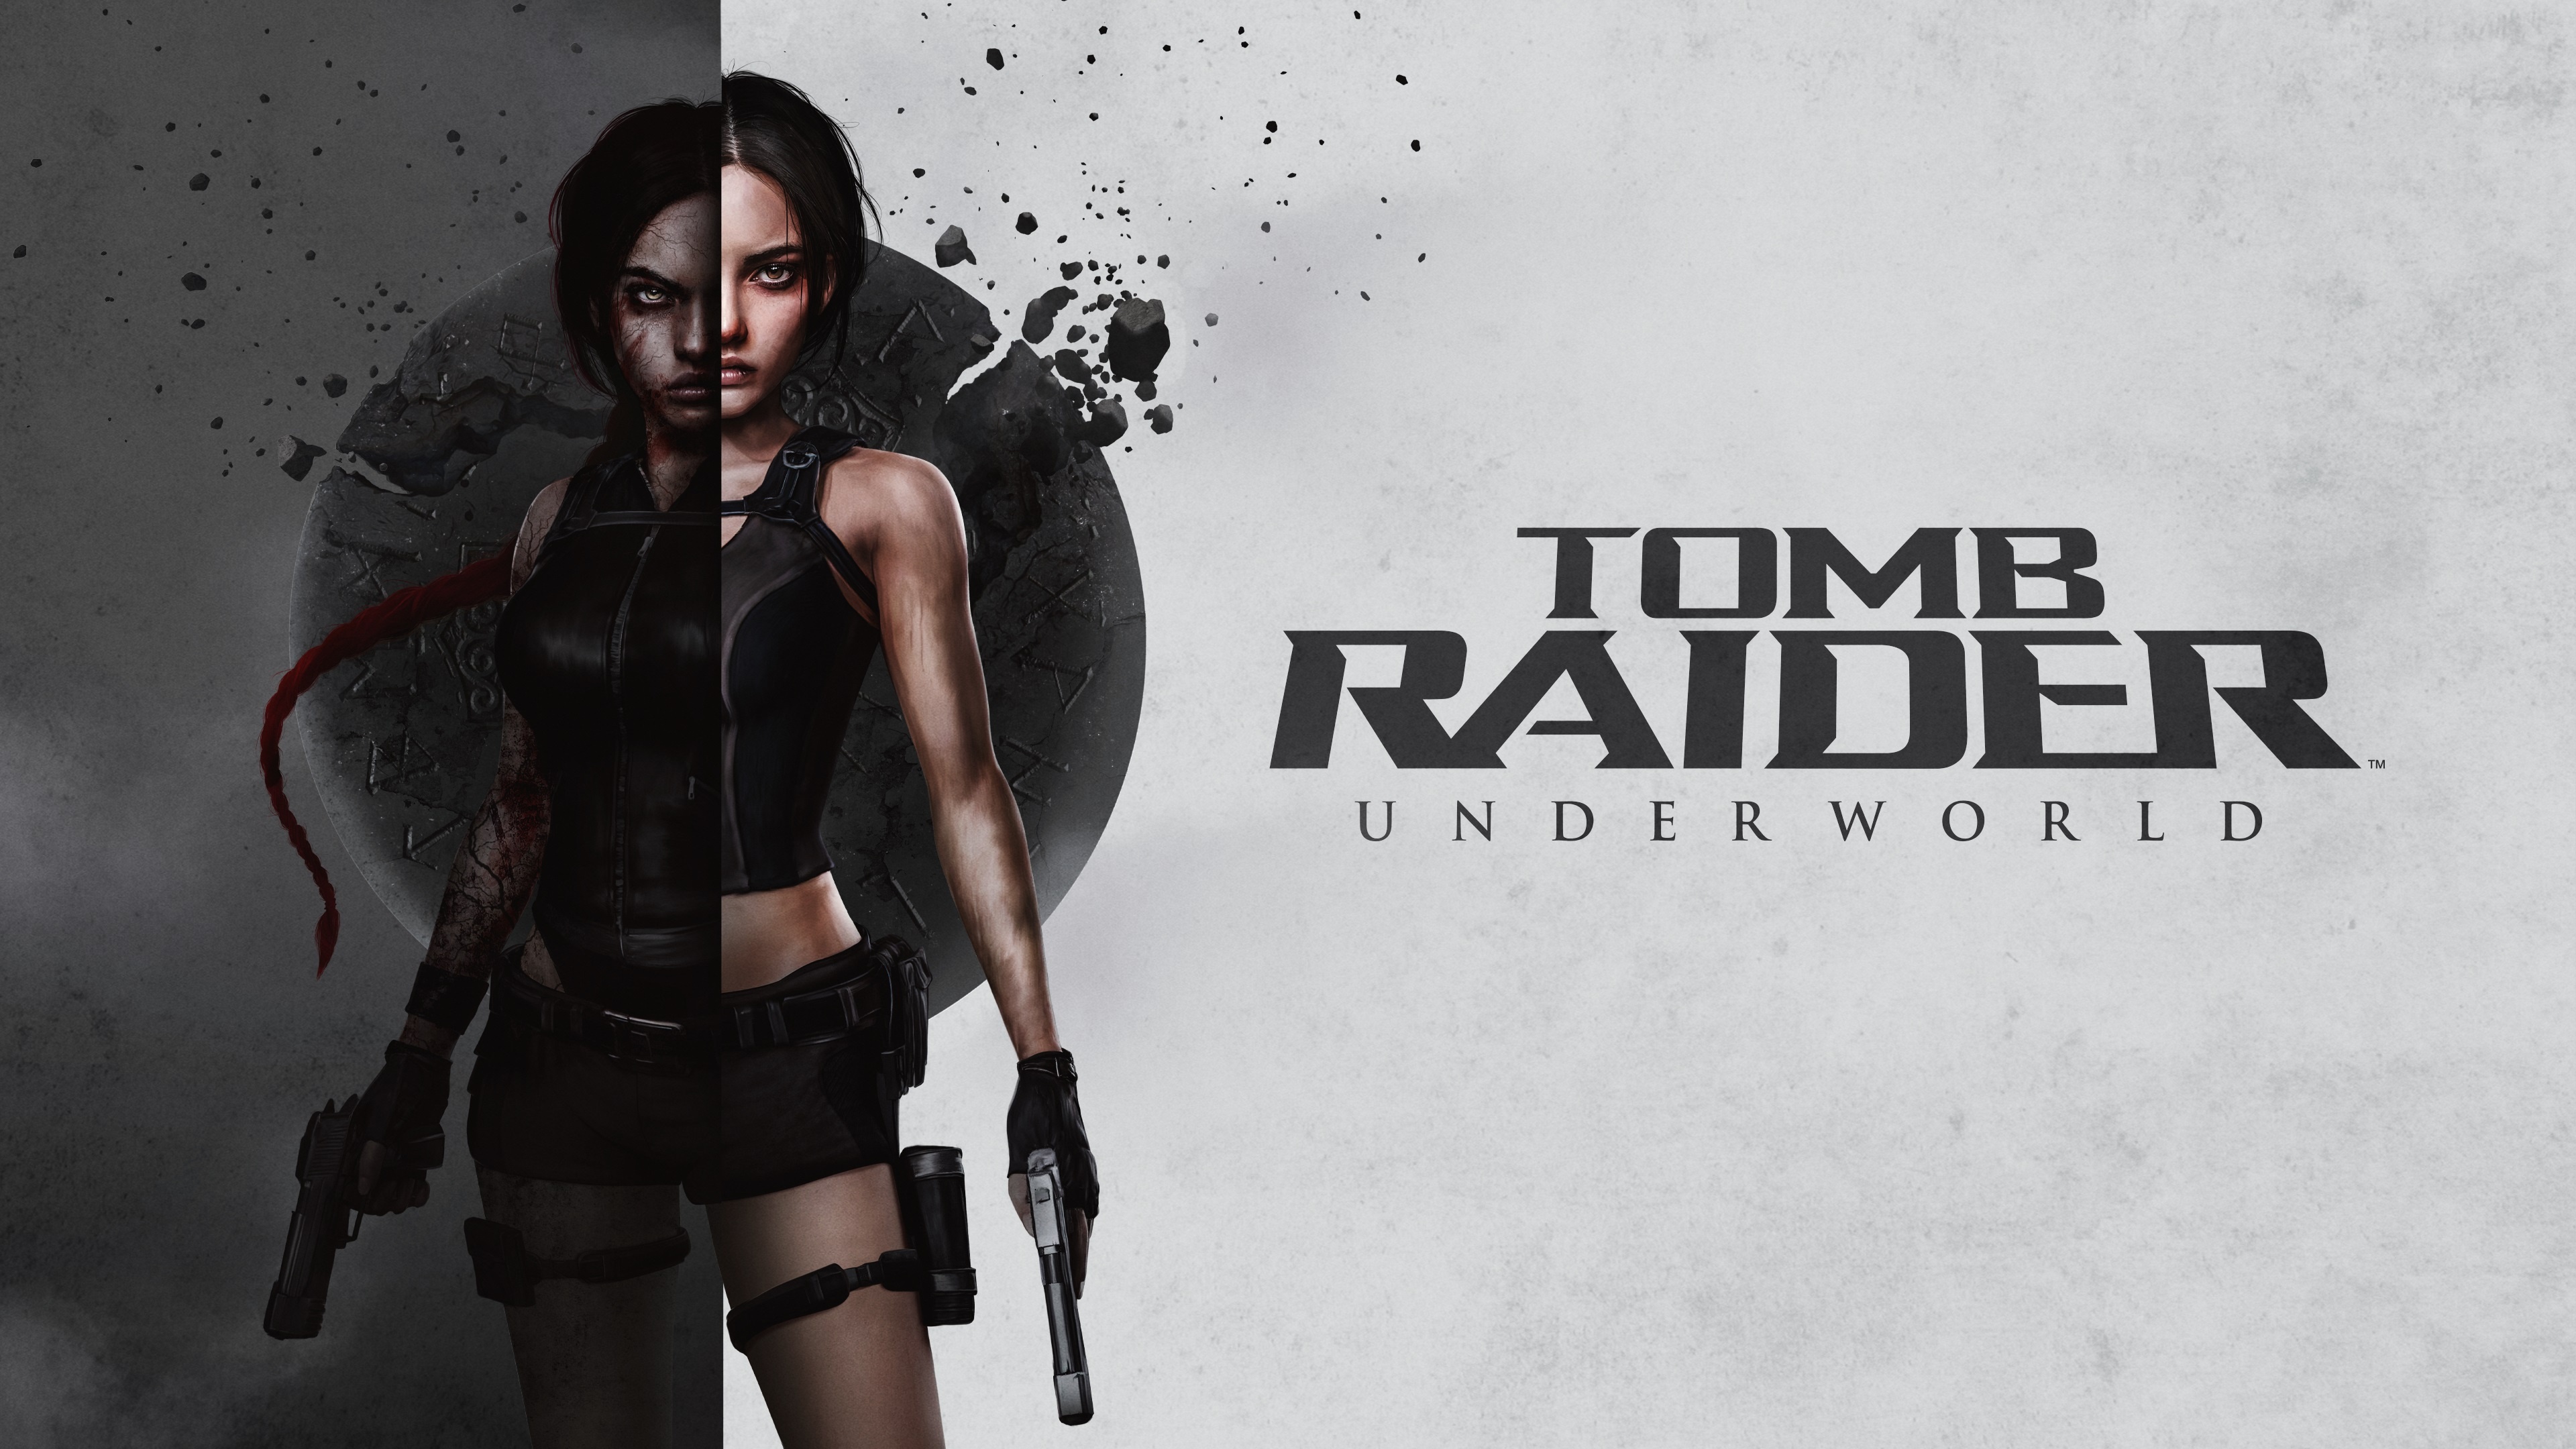 Tomb Raider: Underworld Wallpapers (55+ images inside)